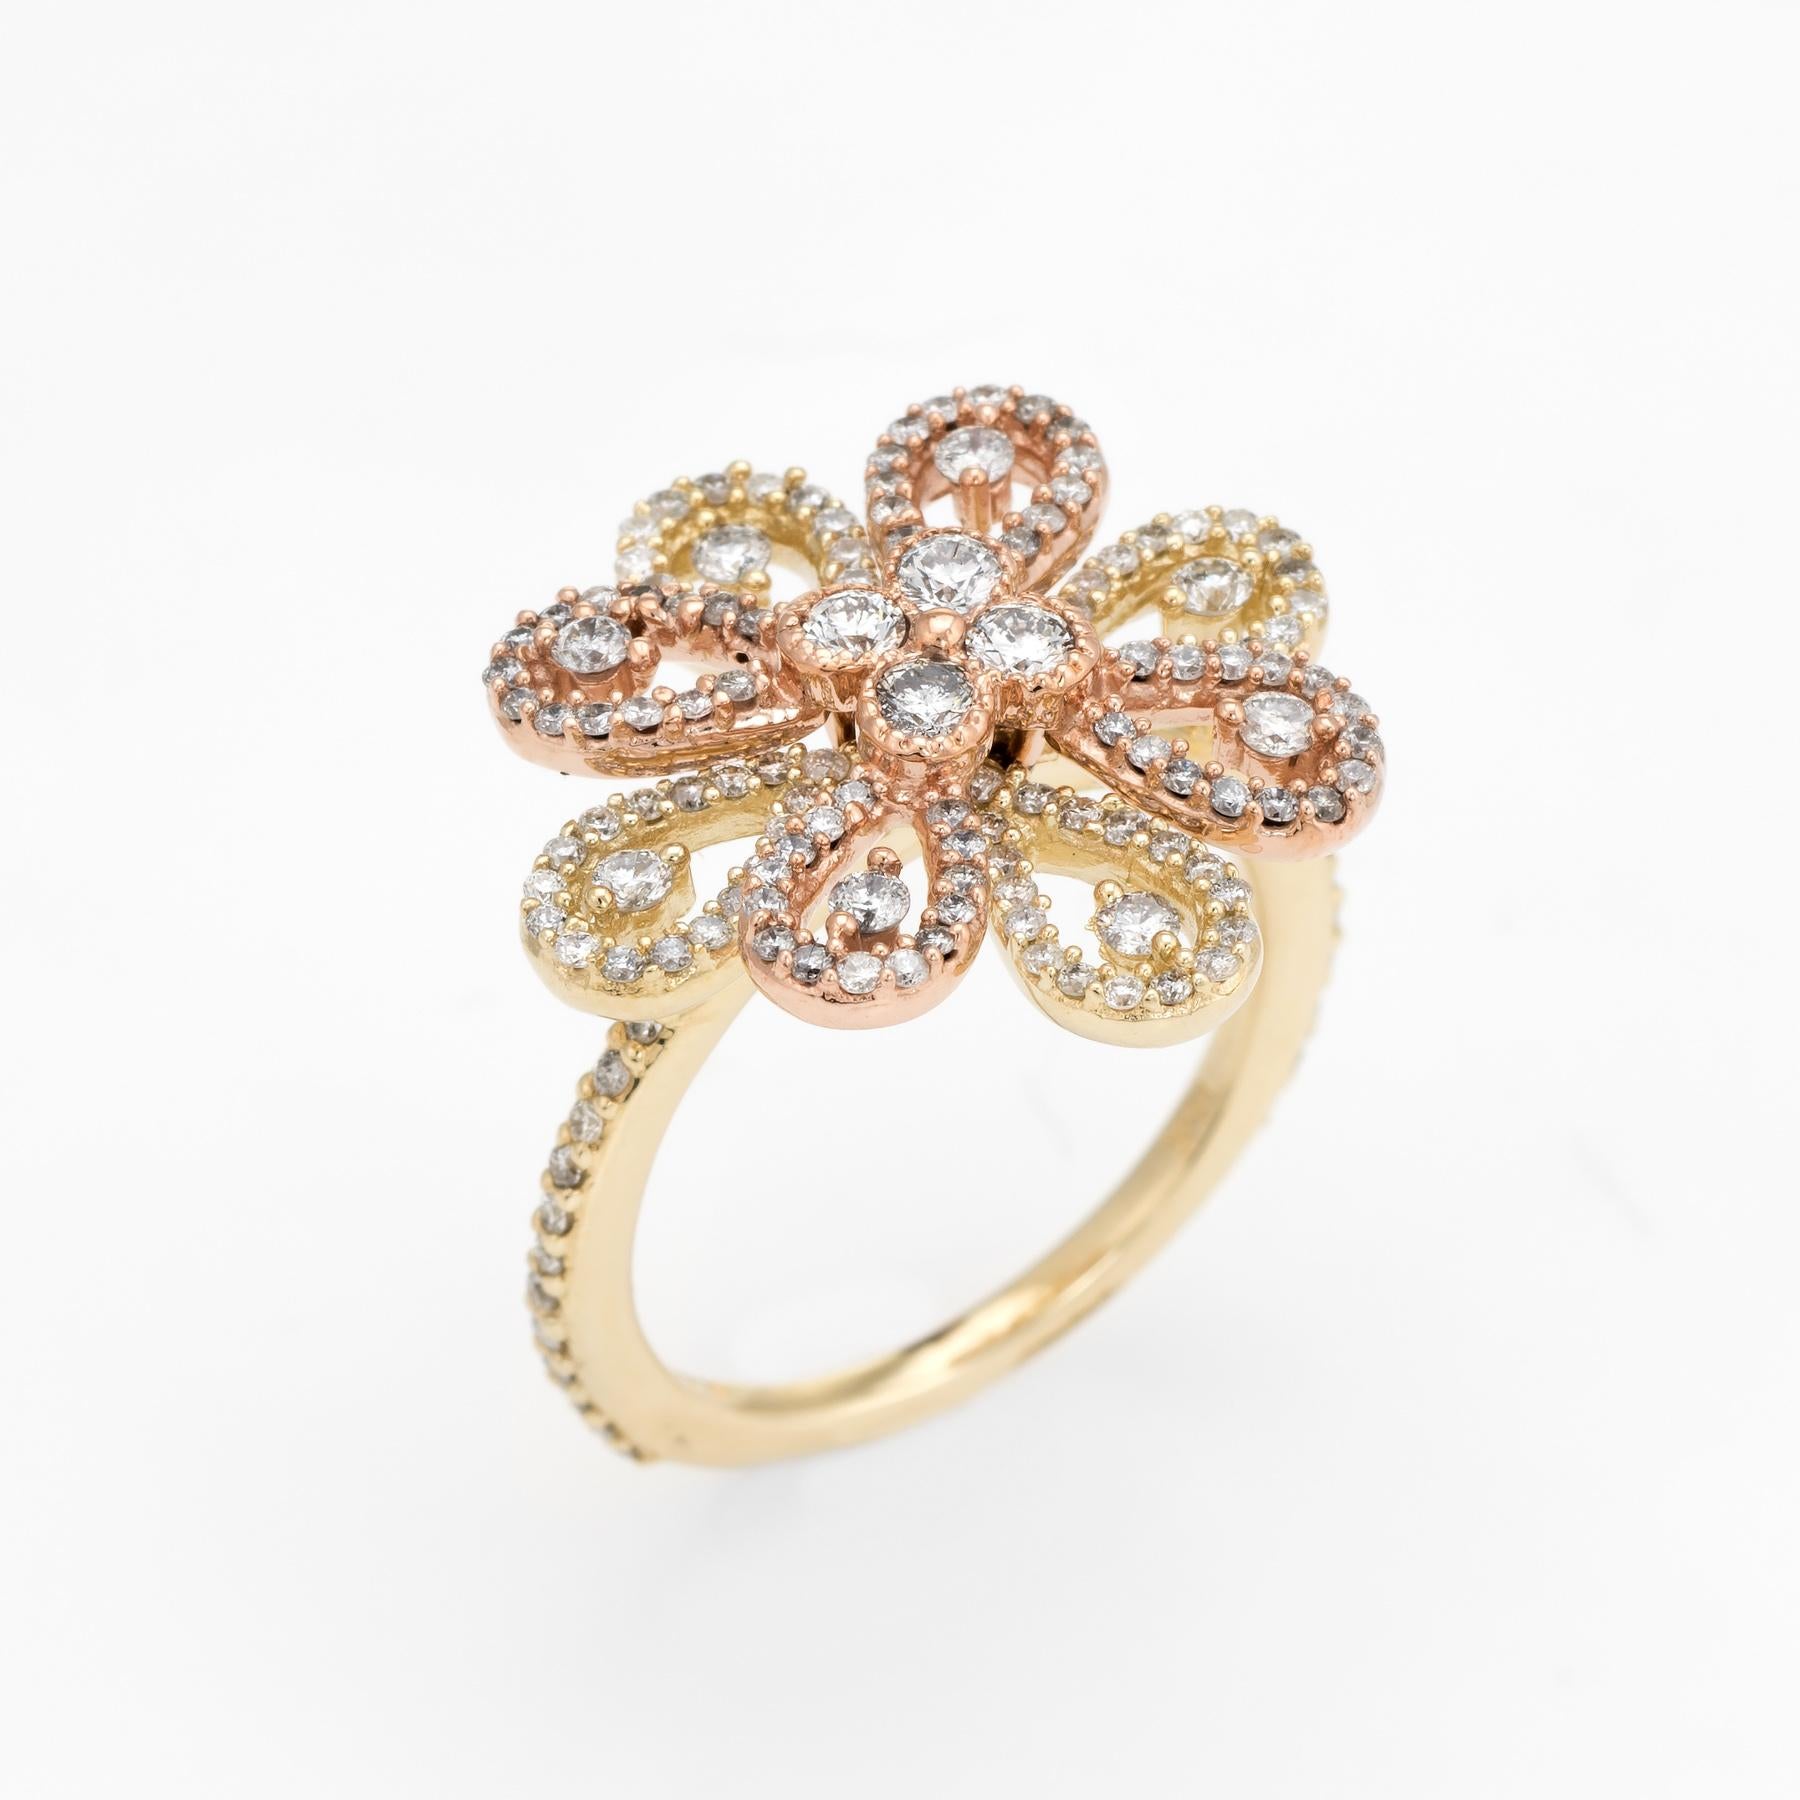 Finely detailed estate diamond cocktail ring, crafted in 14 karat yellow & rose gold. 

Round brilliant cut diamonds graduate in size from 0.001 to 0.05 carats, totaling an estimated 1.10 carats (estimated at H-I color and SI1-2 clarity).
 
The